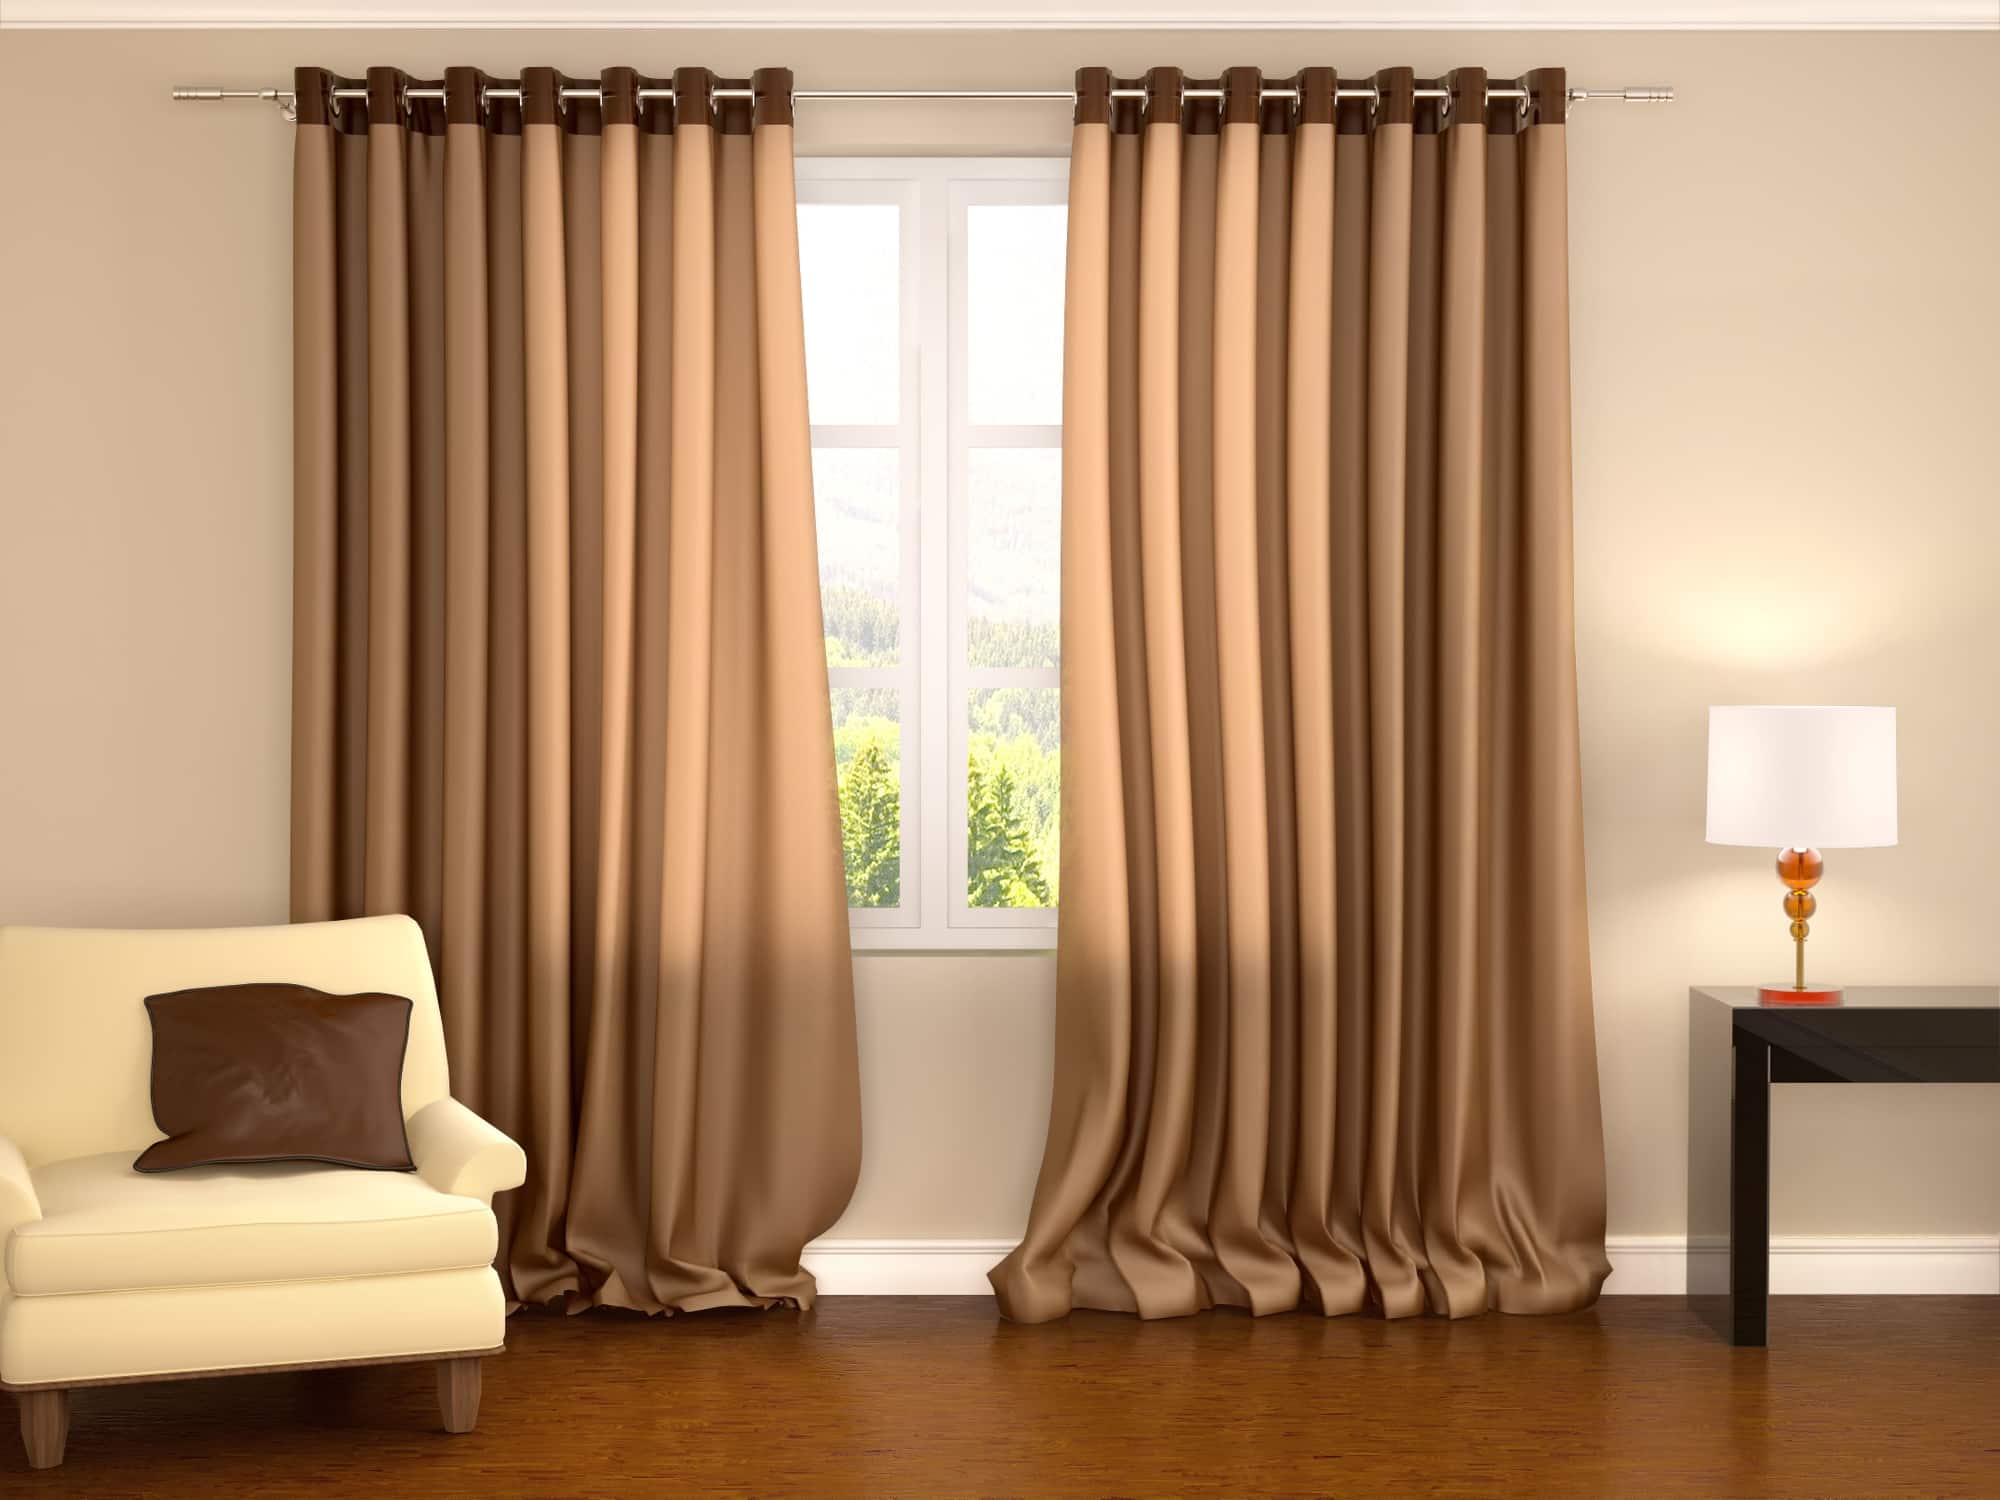 Curtain Dry Cleaning Services in Cork Excellent Dry Cleaners LTD, Cork Cork 085 723 4204